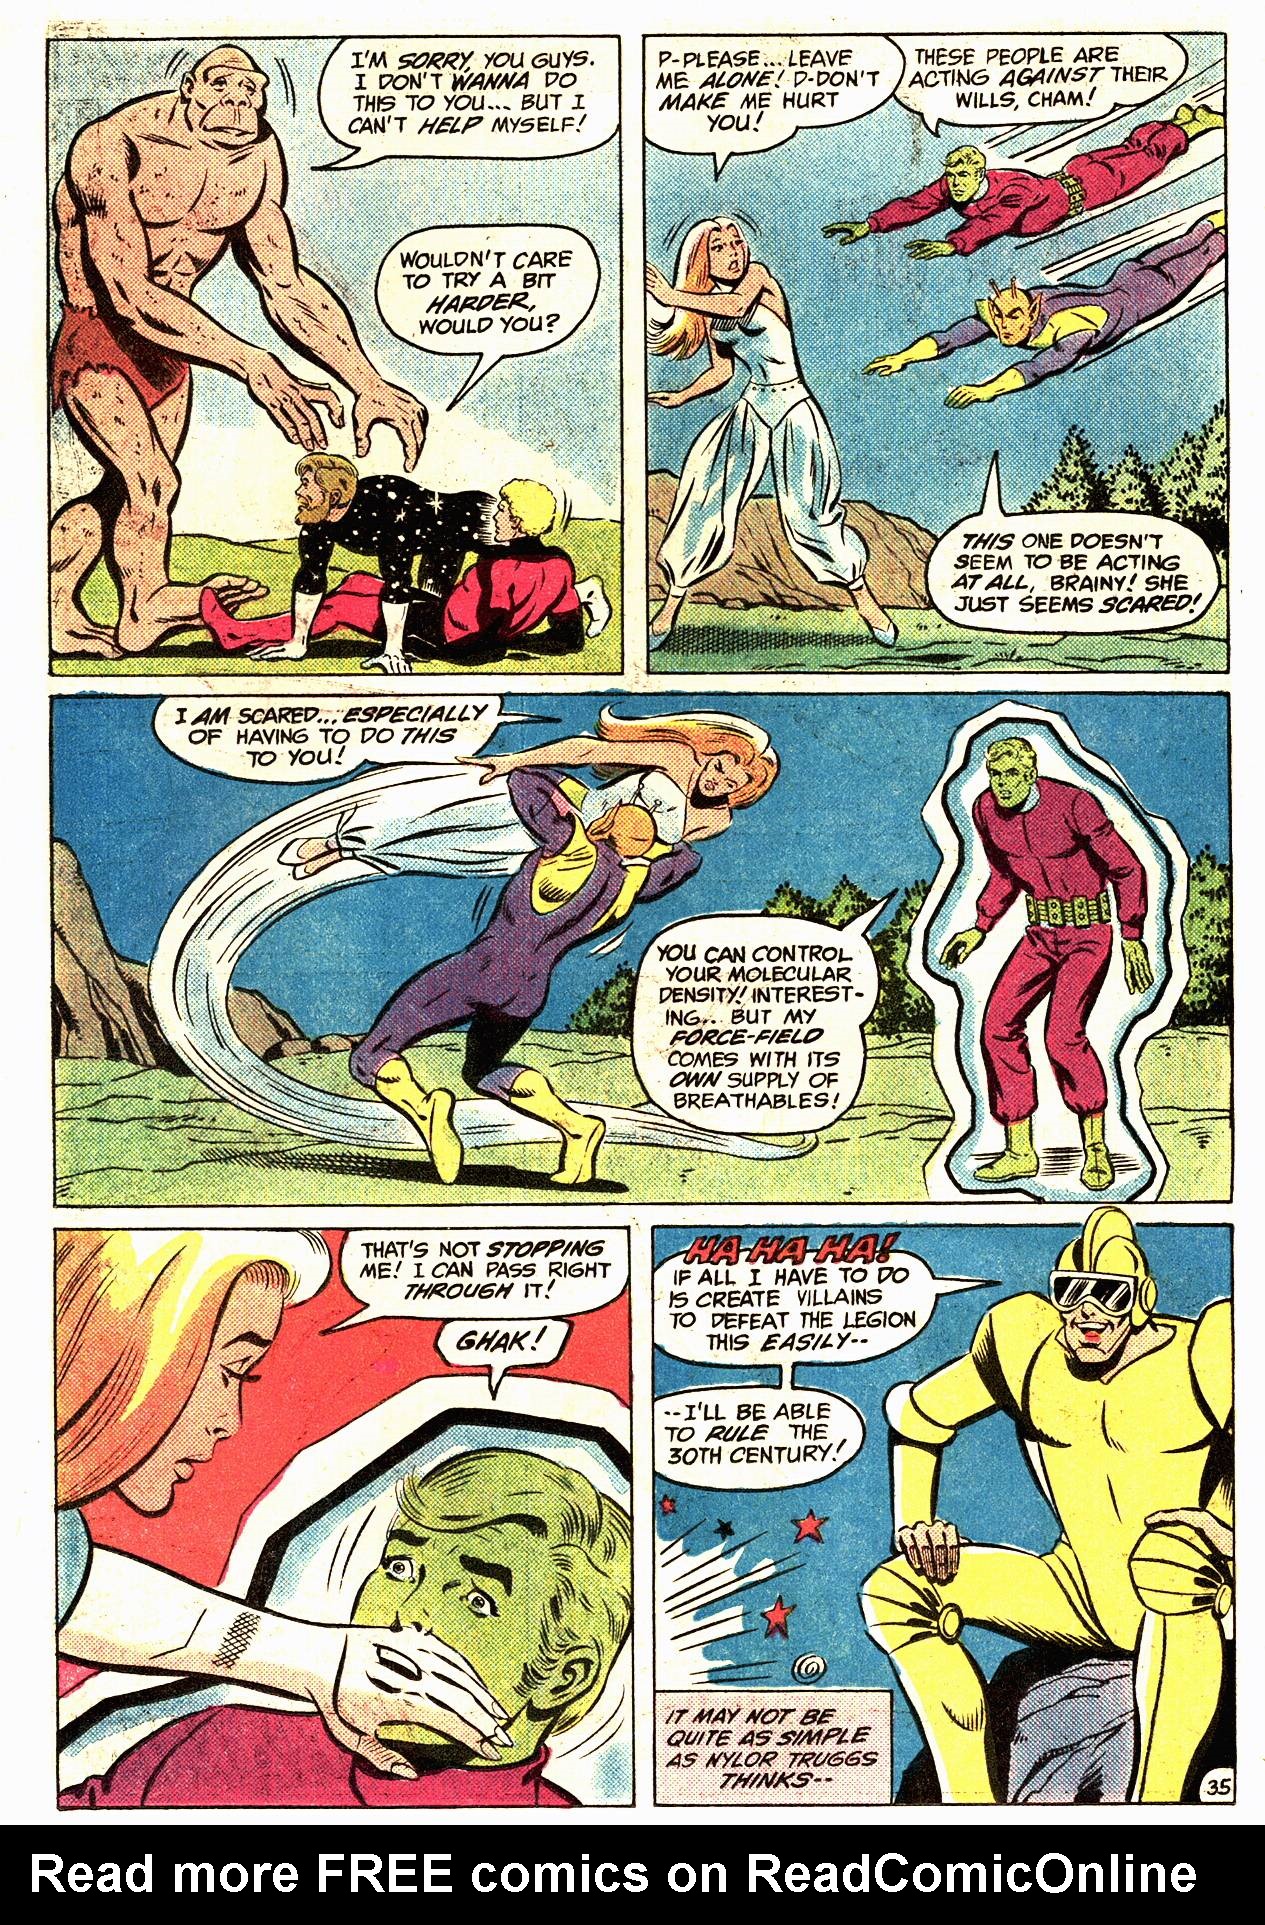 The New Adventures of Superboy 50 Page 35